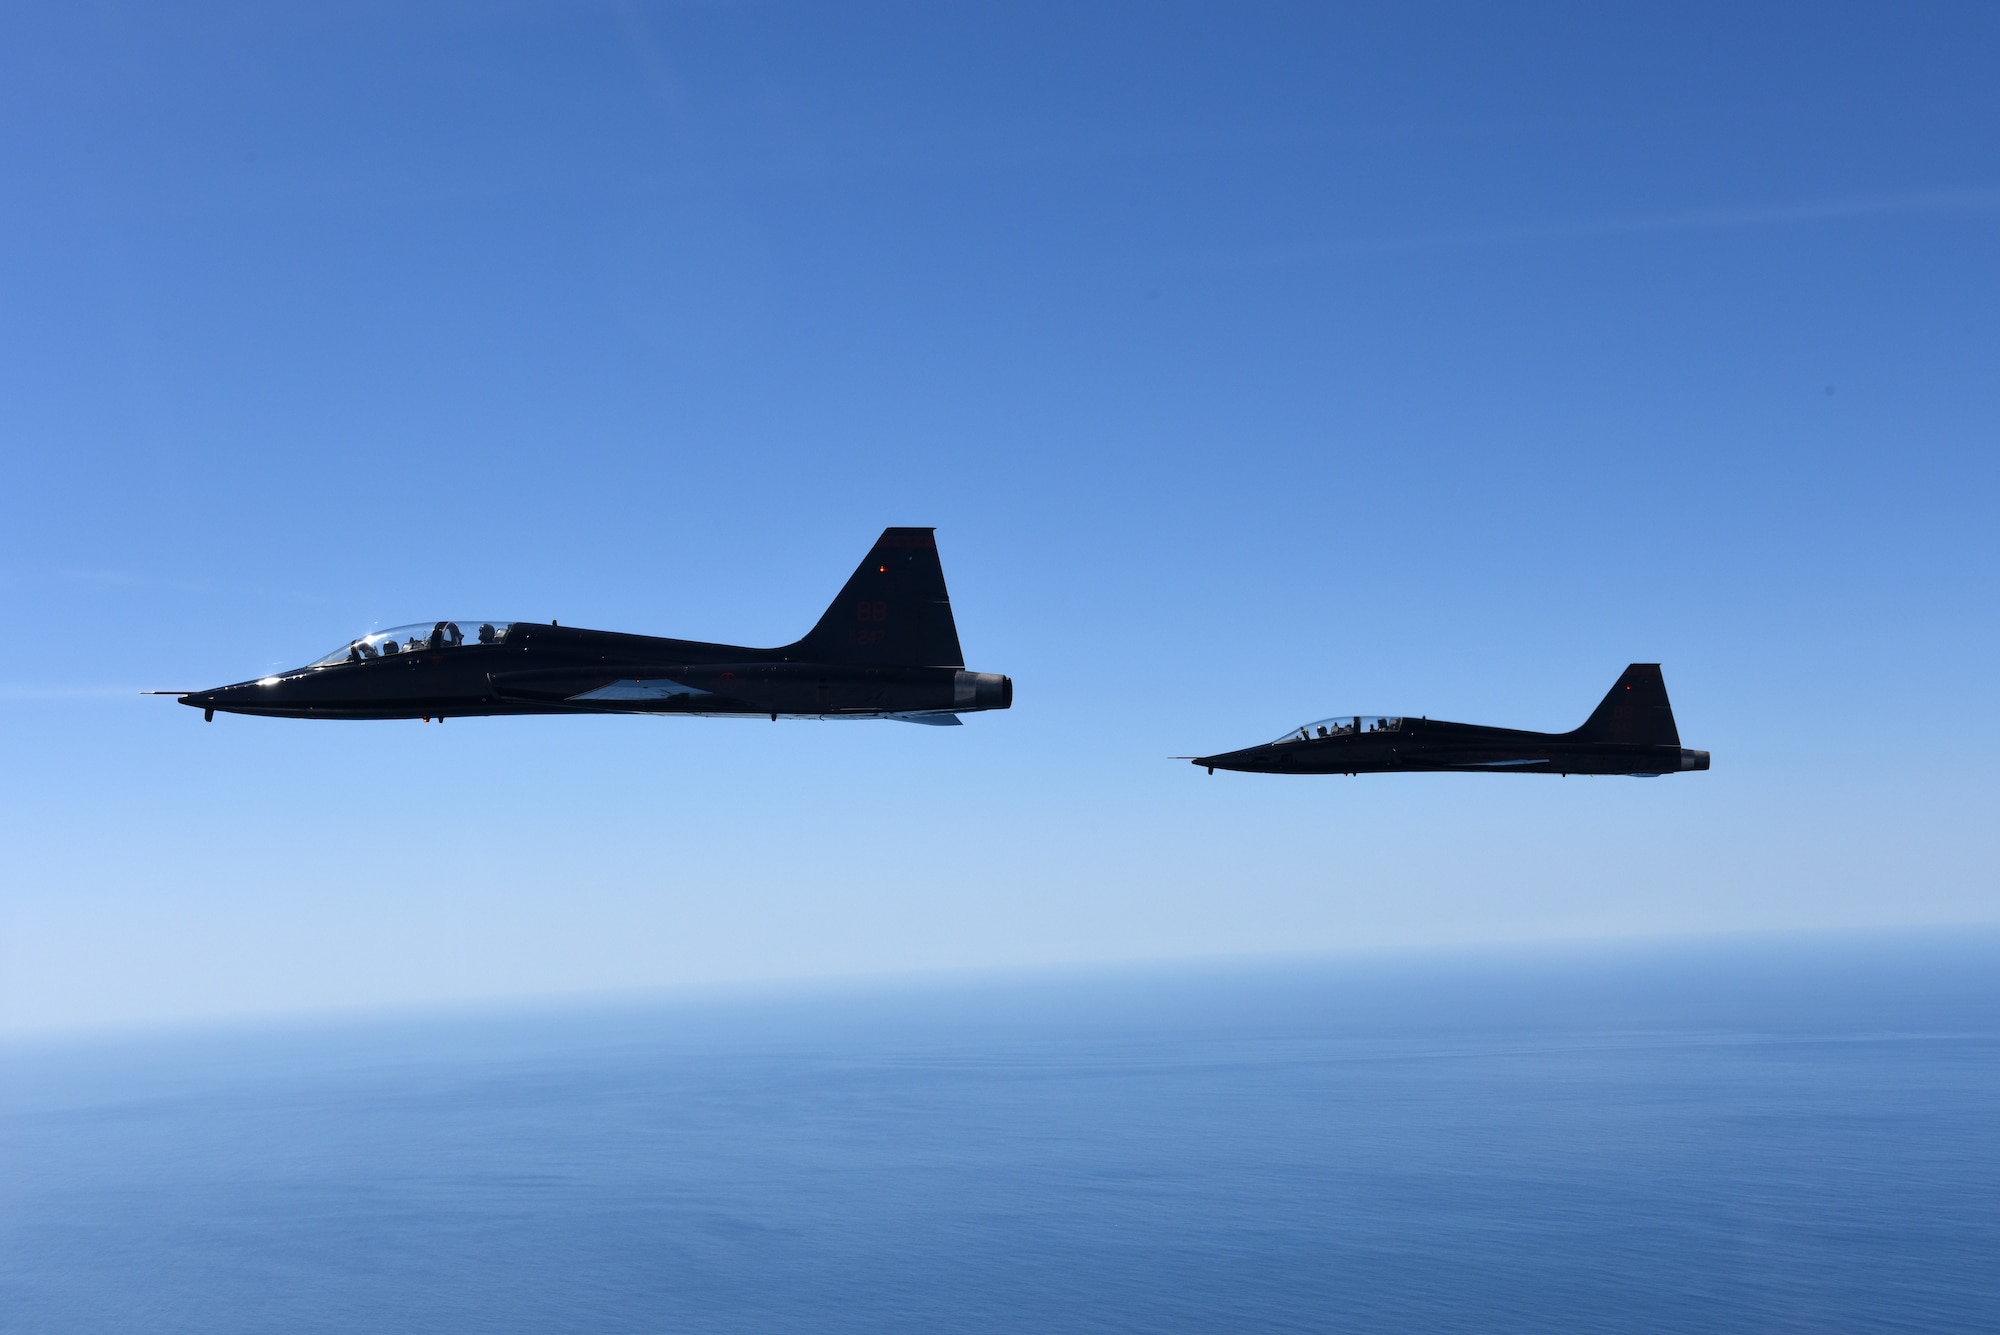 T-38 formation flight over Northern California